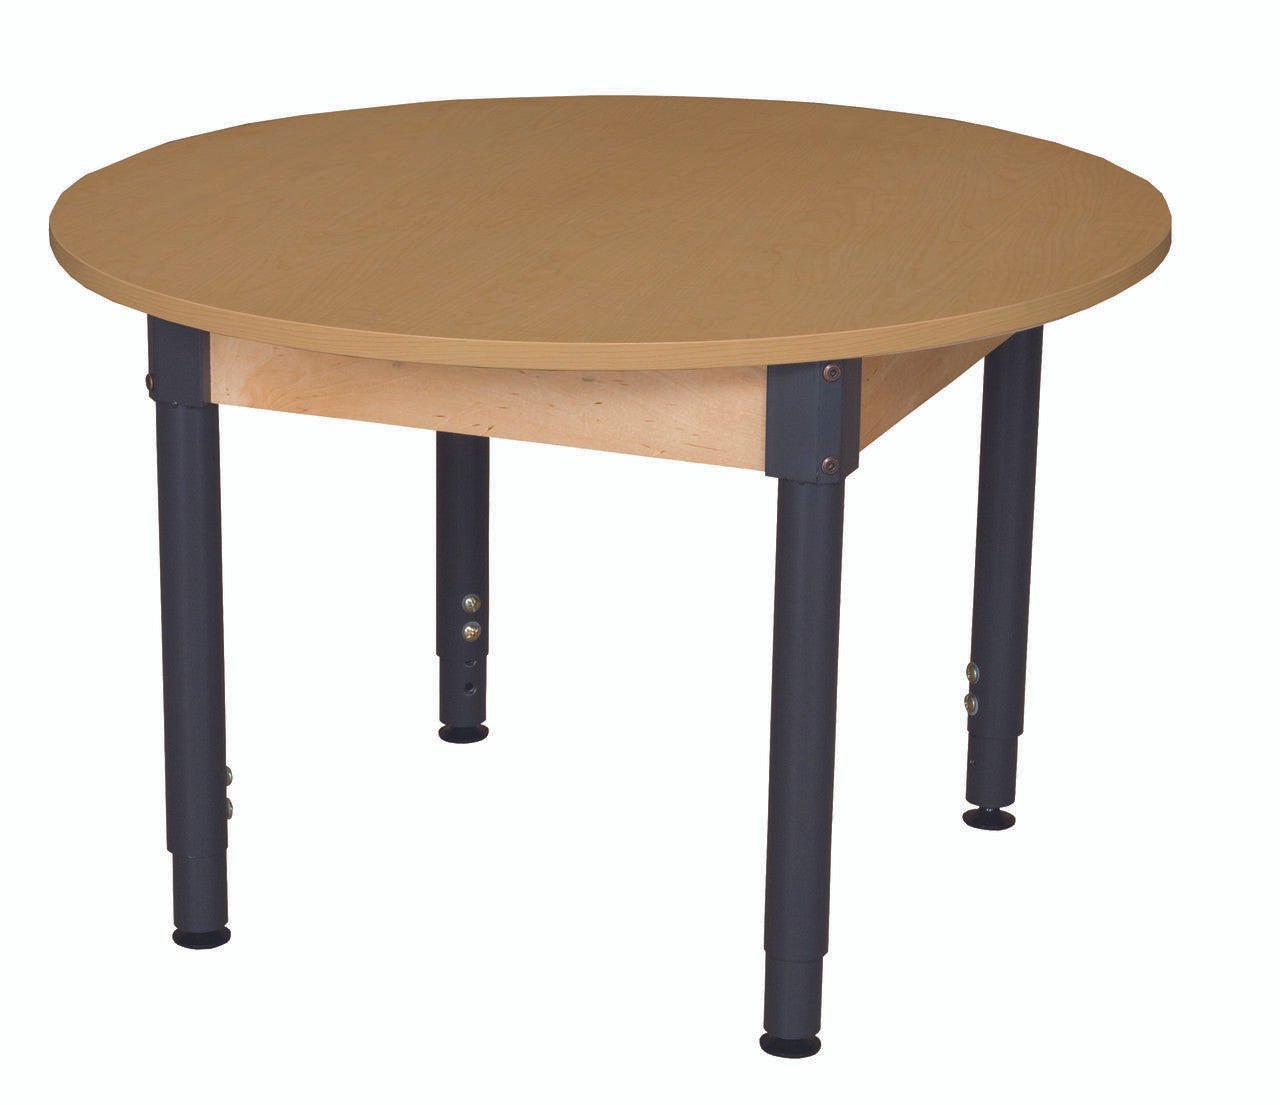 Round High Pressure Laminate Table with Adjustable Legs 18"-29"